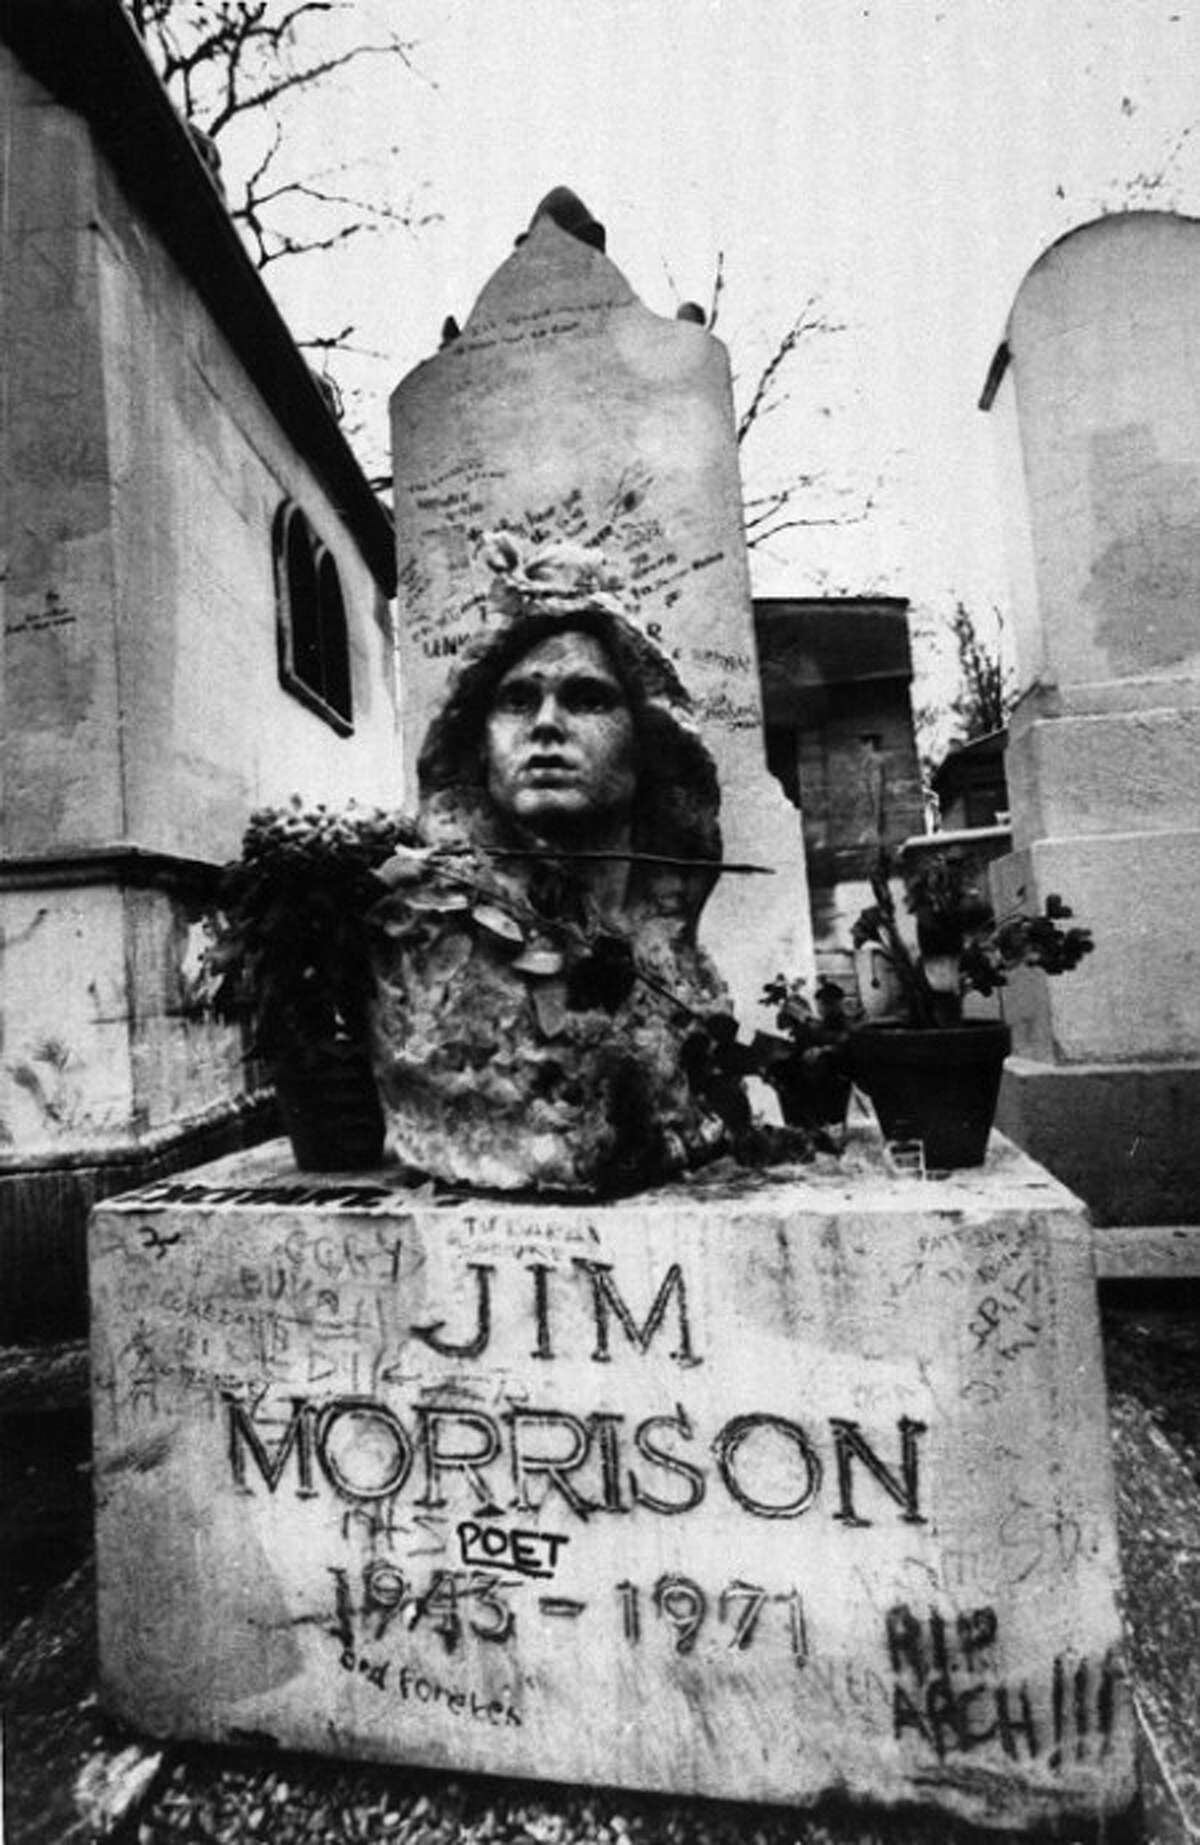 FILE- This Sept. 7, 1971 file photo shows the grave of Jim Morrison, lead singer of the rock group "The Doors," at the Pere Lachaise cemetery in Paris, France. (AP Photo/Joe Marquette,File)